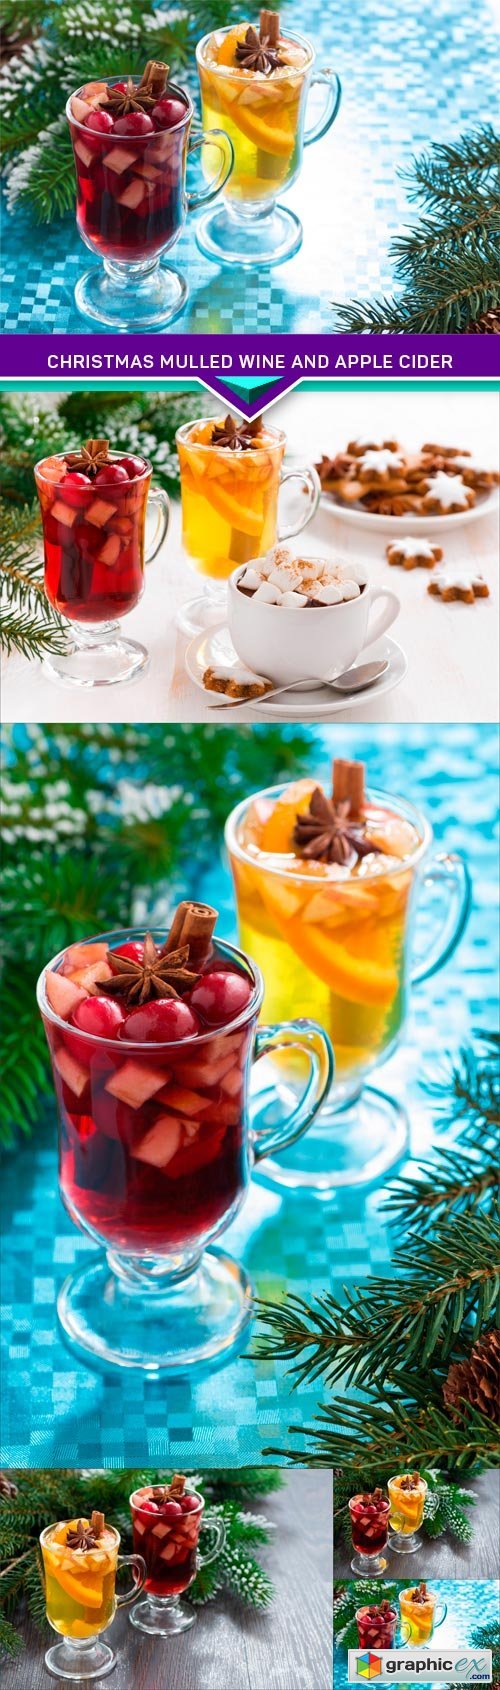 Christmas mulled wine and apple cider 5X JPEG